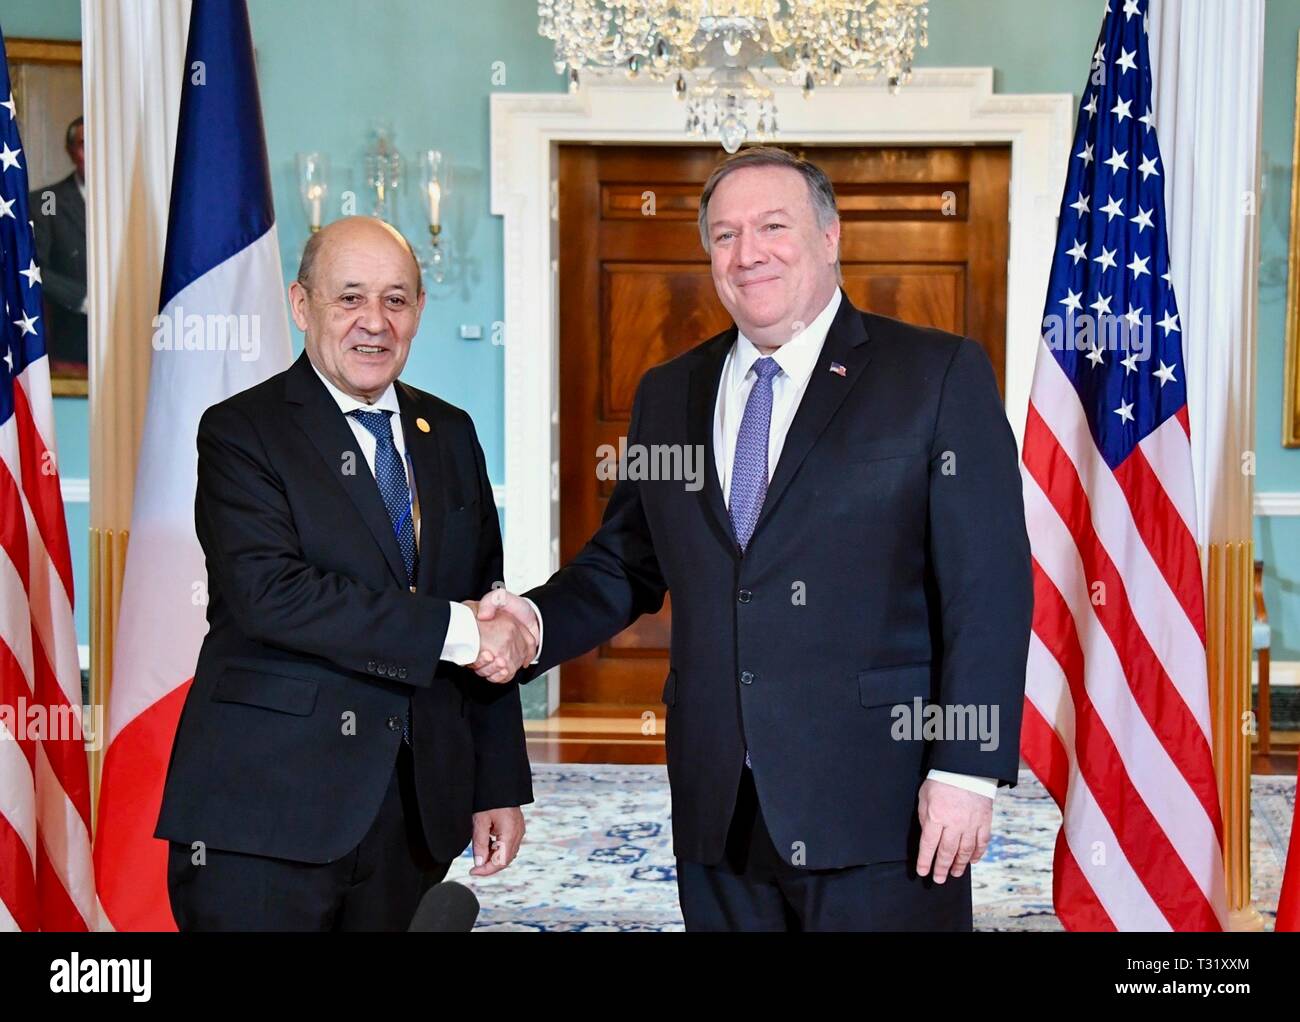 U.S. Secretary of State Mike Pompeo shakes hands with French Foreign Minister Jean-Yves Le Drian following a bilateral meeting on the sidelines of the NATO Ministerial at the State Department April 3, 2019 in Washington, D.C. Stock Photo